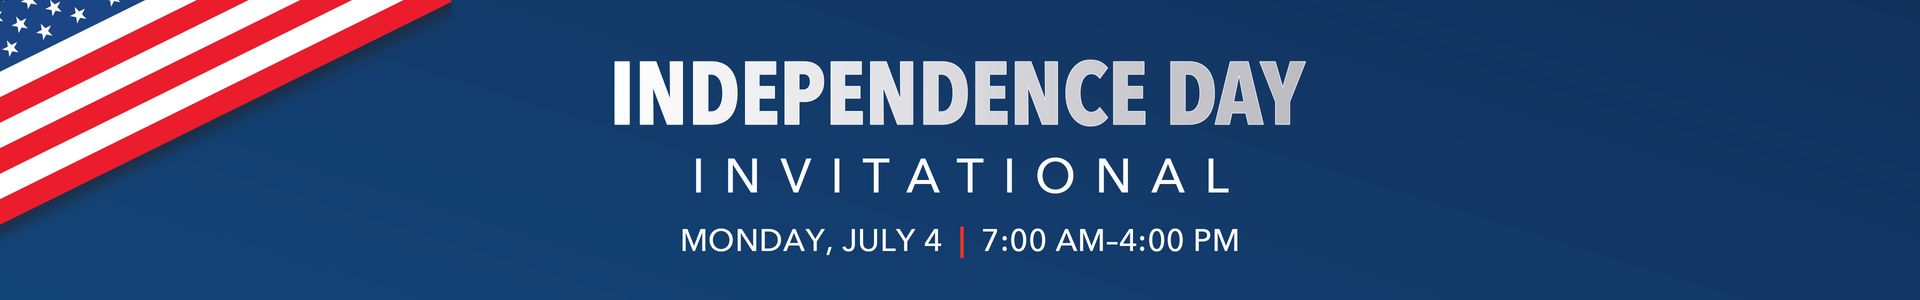 Independence Day Invitational